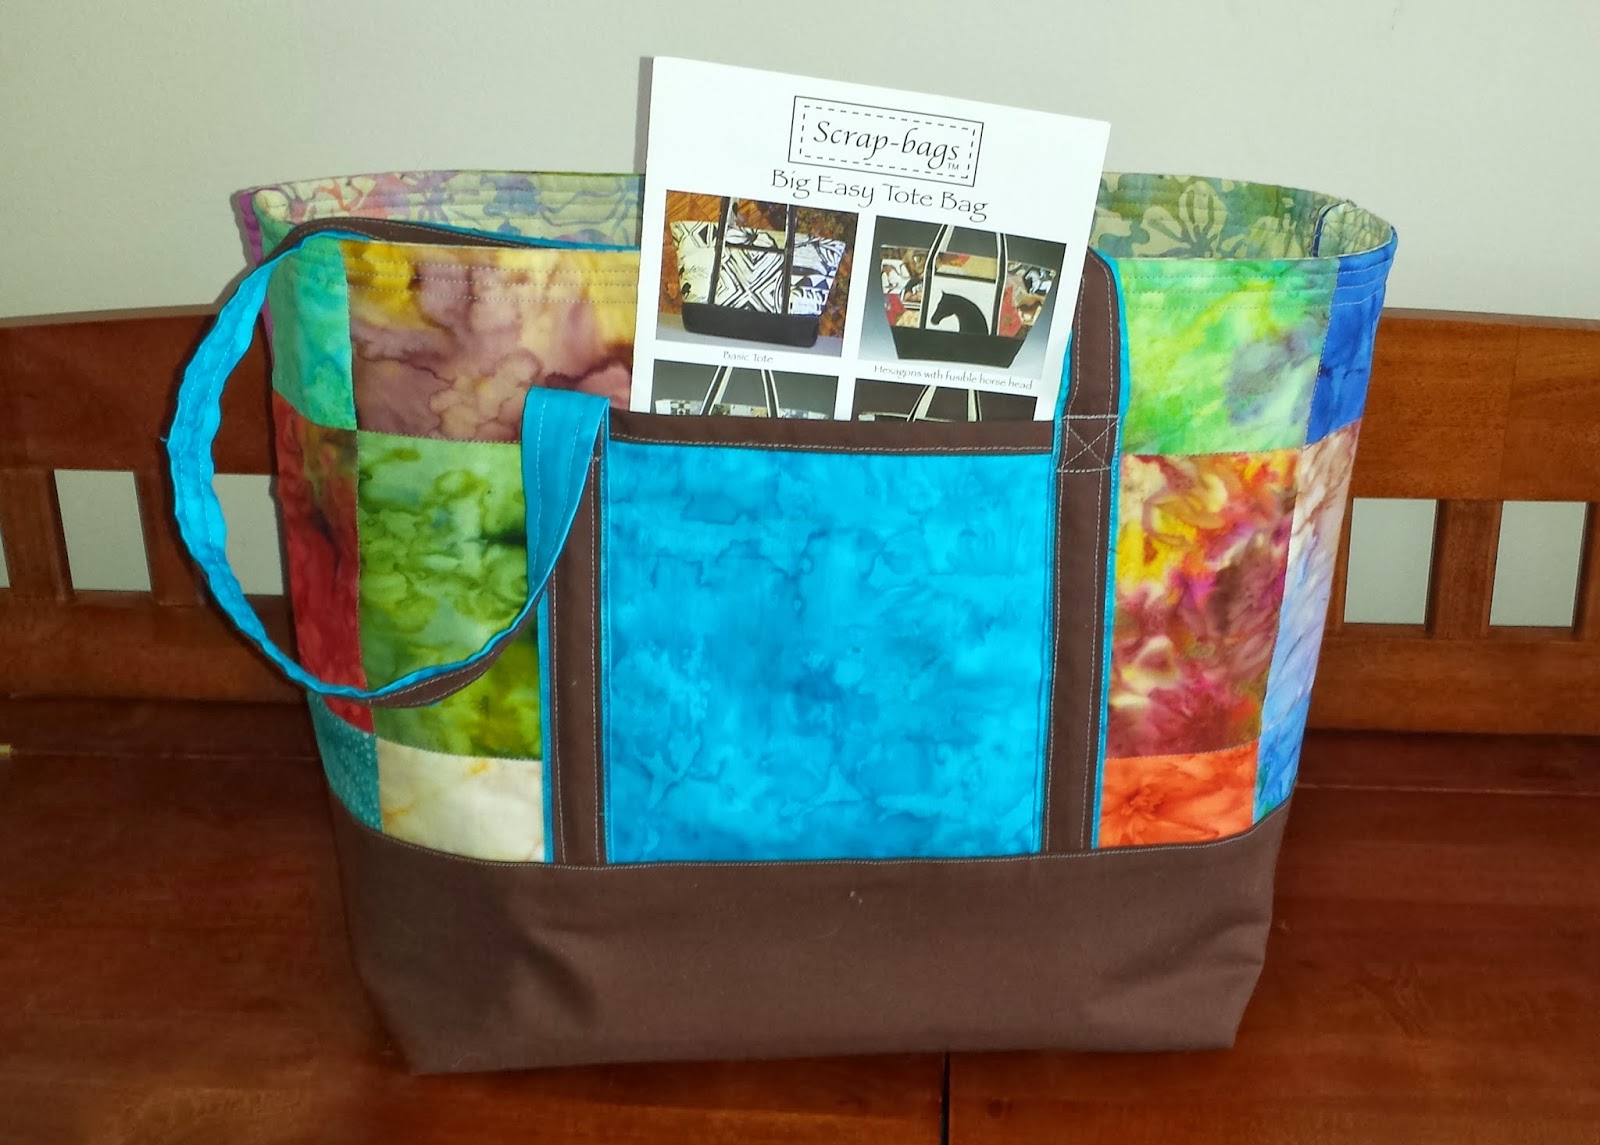 is perfect downloadable pattern available here big easy tote pattern